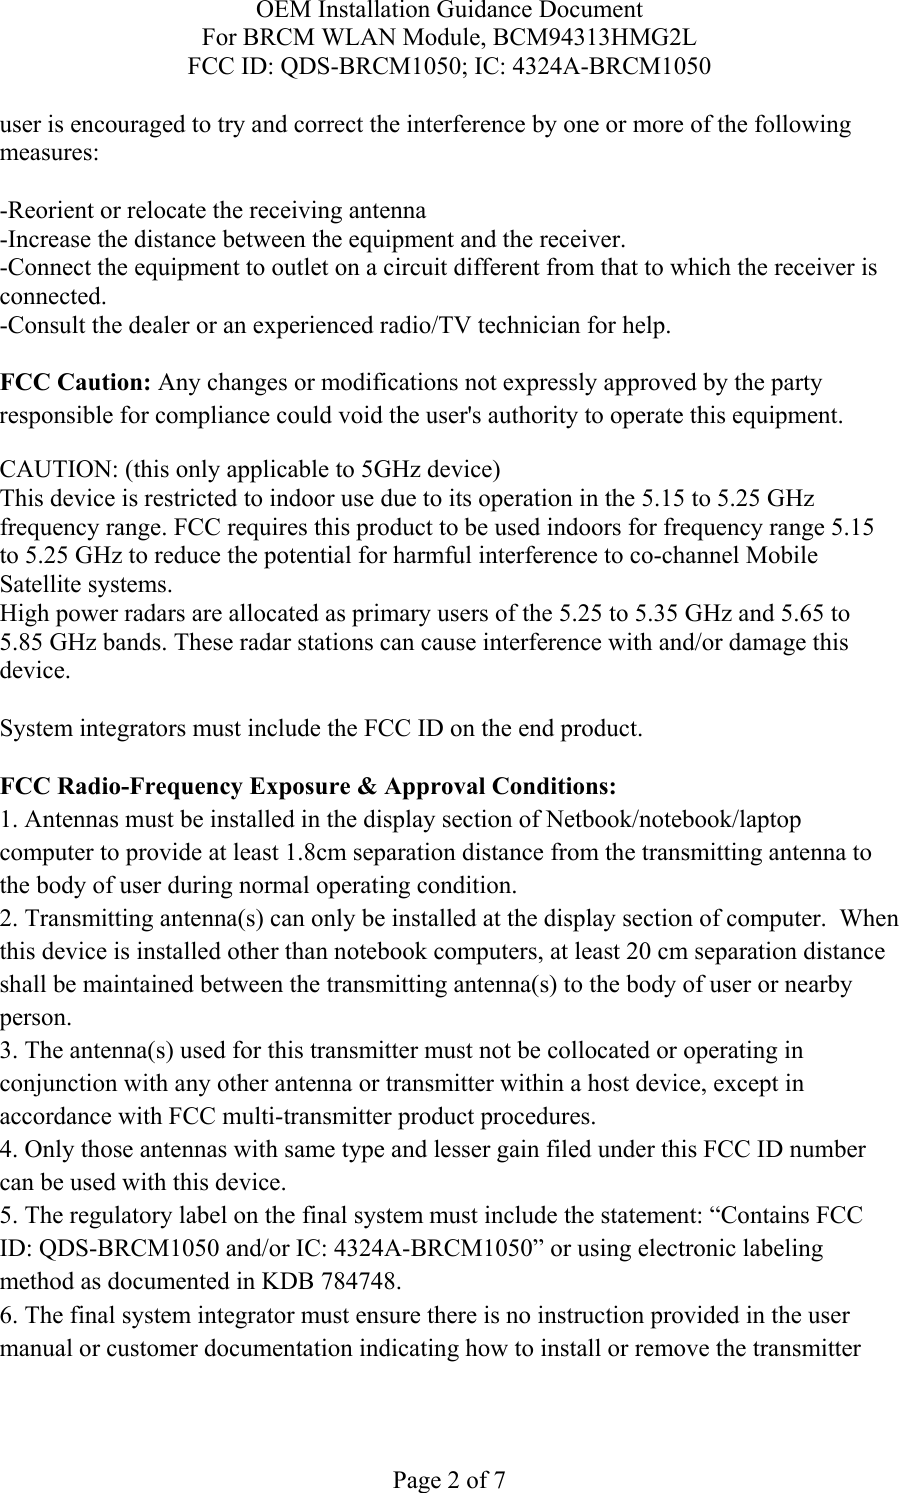 OEM Installation Guidance Document For BRCM WLAN Module, BCM94313HMG2L FCC ID: QDS-BRCM1050; IC: 4324A-BRCM1050  Page 2 of 7 user is encouraged to try and correct the interference by one or more of the following measures:   -Reorient or relocate the receiving antenna -Increase the distance between the equipment and the receiver. -Connect the equipment to outlet on a circuit different from that to which the receiver is connected. -Consult the dealer or an experienced radio/TV technician for help.  FCC Caution: Any changes or modifications not expressly approved by the party responsible for compliance could void the user&apos;s authority to operate this equipment. CAUTION: (this only applicable to 5GHz device) This device is restricted to indoor use due to its operation in the 5.15 to 5.25 GHz frequency range. FCC requires this product to be used indoors for frequency range 5.15 to 5.25 GHz to reduce the potential for harmful interference to co-channel Mobile Satellite systems. High power radars are allocated as primary users of the 5.25 to 5.35 GHz and 5.65 to 5.85 GHz bands. These radar stations can cause interference with and/or damage this device.  System integrators must include the FCC ID on the end product.   FCC Radio-Frequency Exposure &amp; Approval Conditions: 1. Antennas must be installed in the display section of Netbook/notebook/laptop computer to provide at least 1.8cm separation distance from the transmitting antenna to the body of user during normal operating condition. 2. Transmitting antenna(s) can only be installed at the display section of computer.  When this device is installed other than notebook computers, at least 20 cm separation distance shall be maintained between the transmitting antenna(s) to the body of user or nearby person. 3. The antenna(s) used for this transmitter must not be collocated or operating in conjunction with any other antenna or transmitter within a host device, except in accordance with FCC multi-transmitter product procedures. 4. Only those antennas with same type and lesser gain filed under this FCC ID number can be used with this device. 5. The regulatory label on the final system must include the statement: “Contains FCC ID: QDS-BRCM1050 and/or IC: 4324A-BRCM1050” or using electronic labeling method as documented in KDB 784748. 6. The final system integrator must ensure there is no instruction provided in the user manual or customer documentation indicating how to install or remove the transmitter 